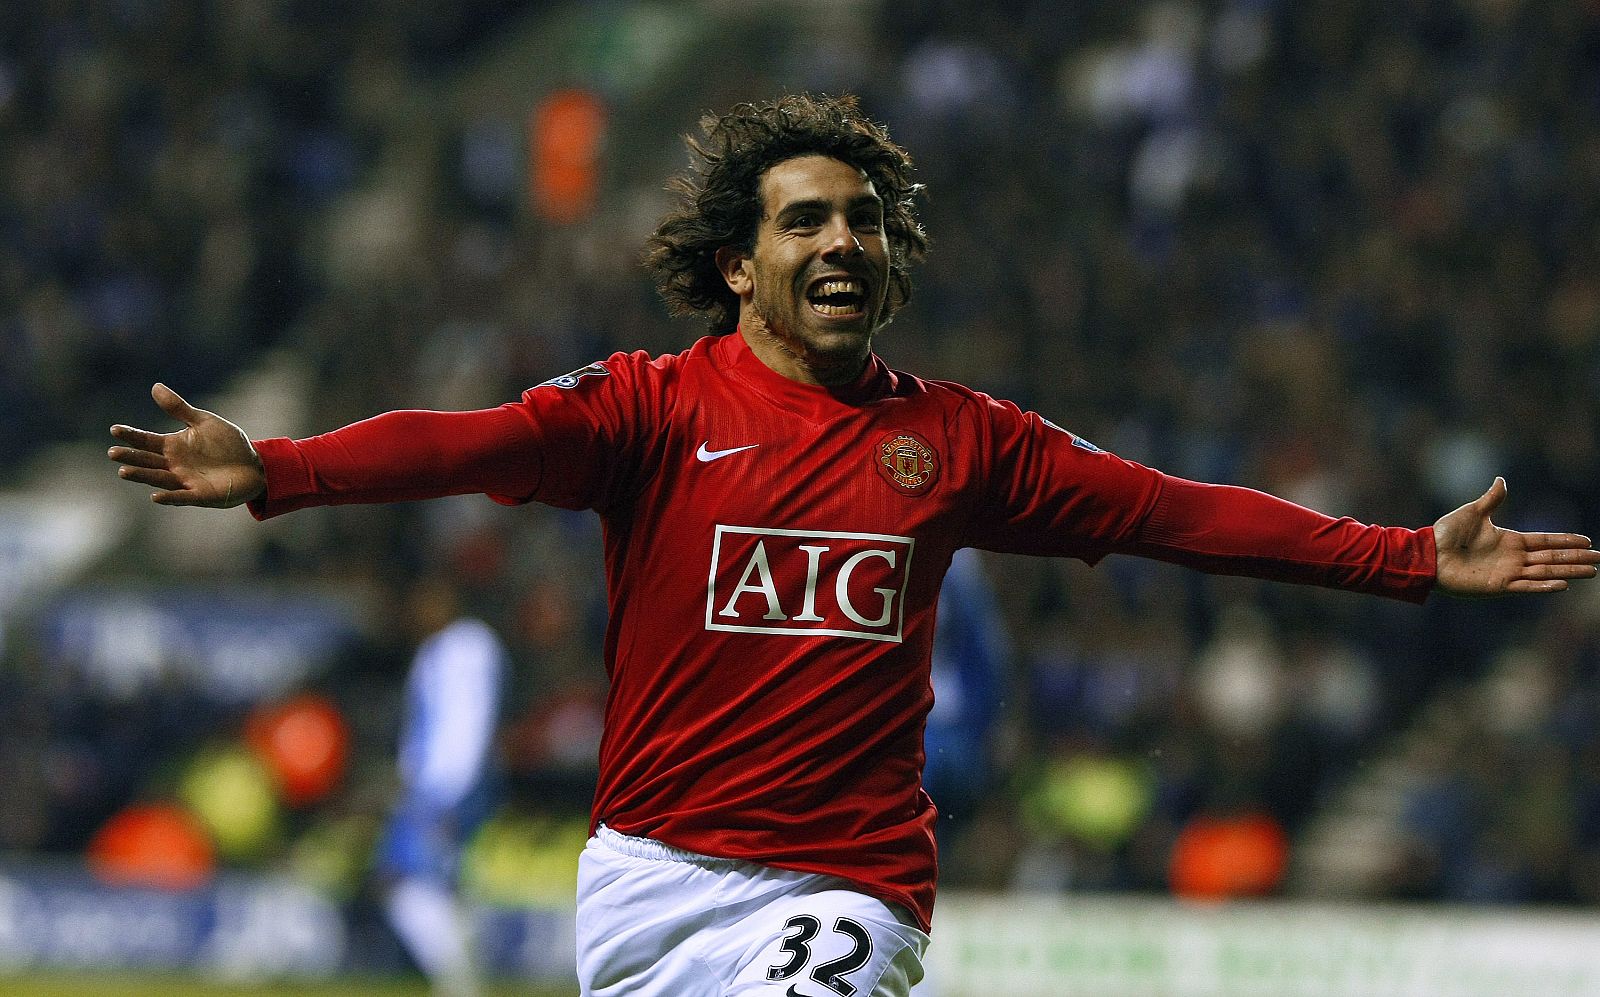 Manchester United's Tevez celebrates after scoring during English Premier League match against Wigan Athletic in Wigan